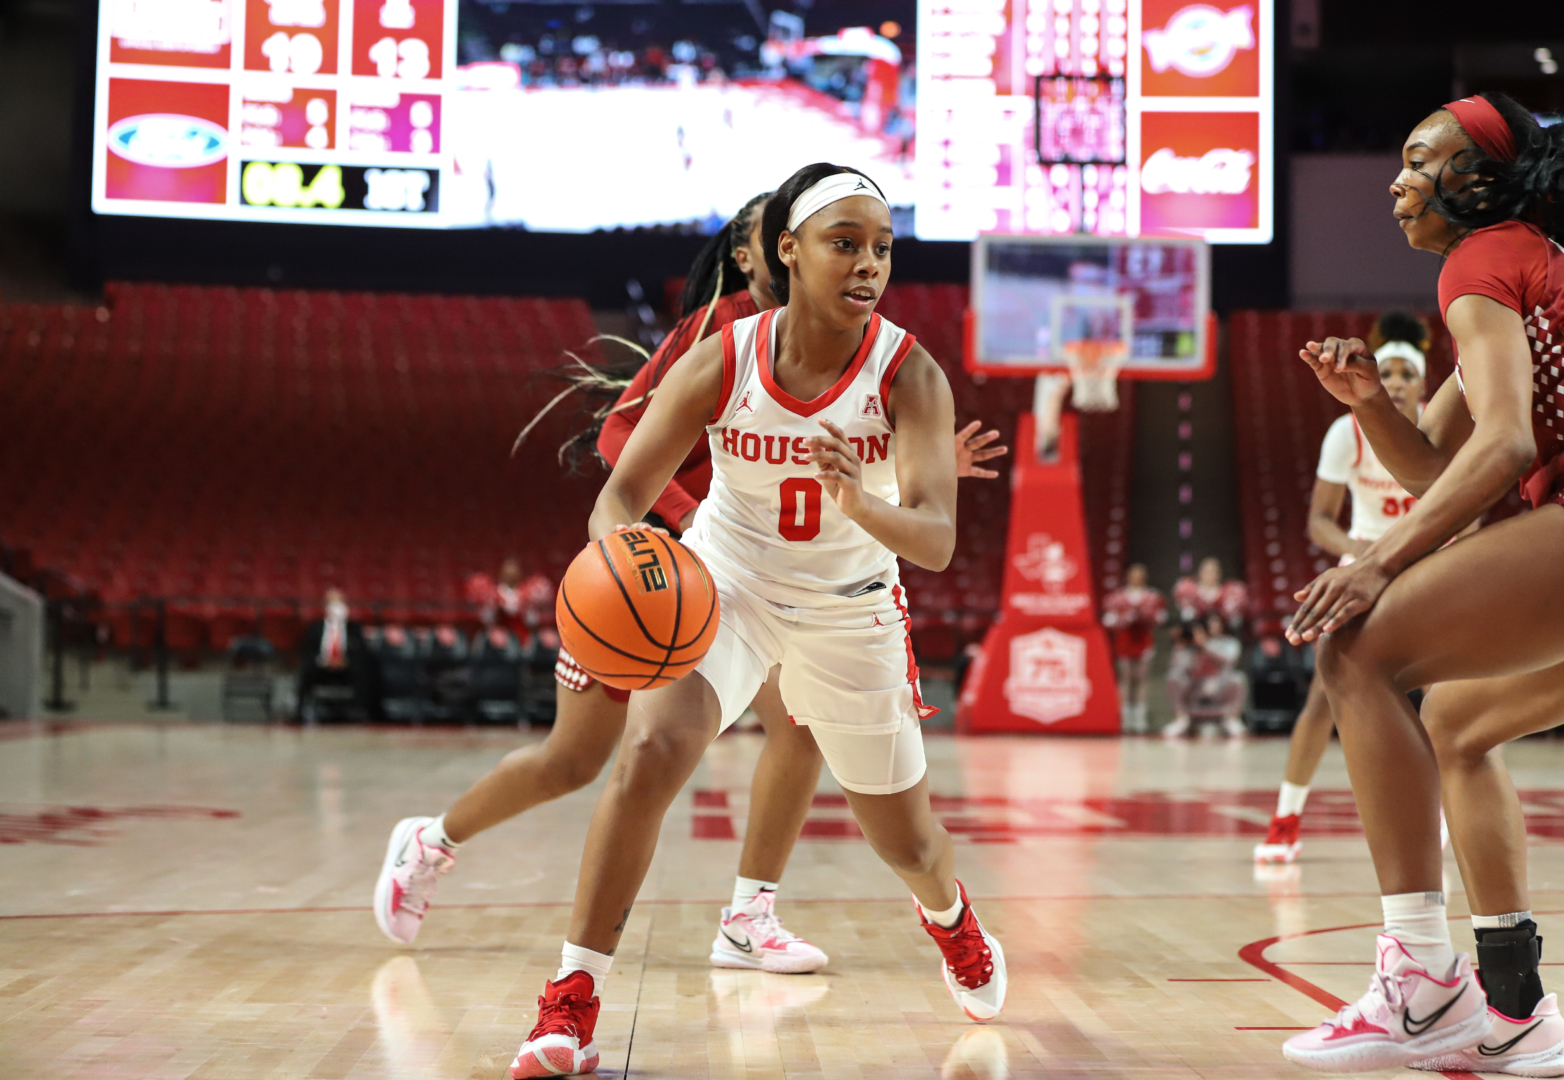 Senior guard Eryka Sidney scored 10 points in UH women's basketball's dominating win over SMU on Saturday afternoon. | Sean Thomas/The Cougar